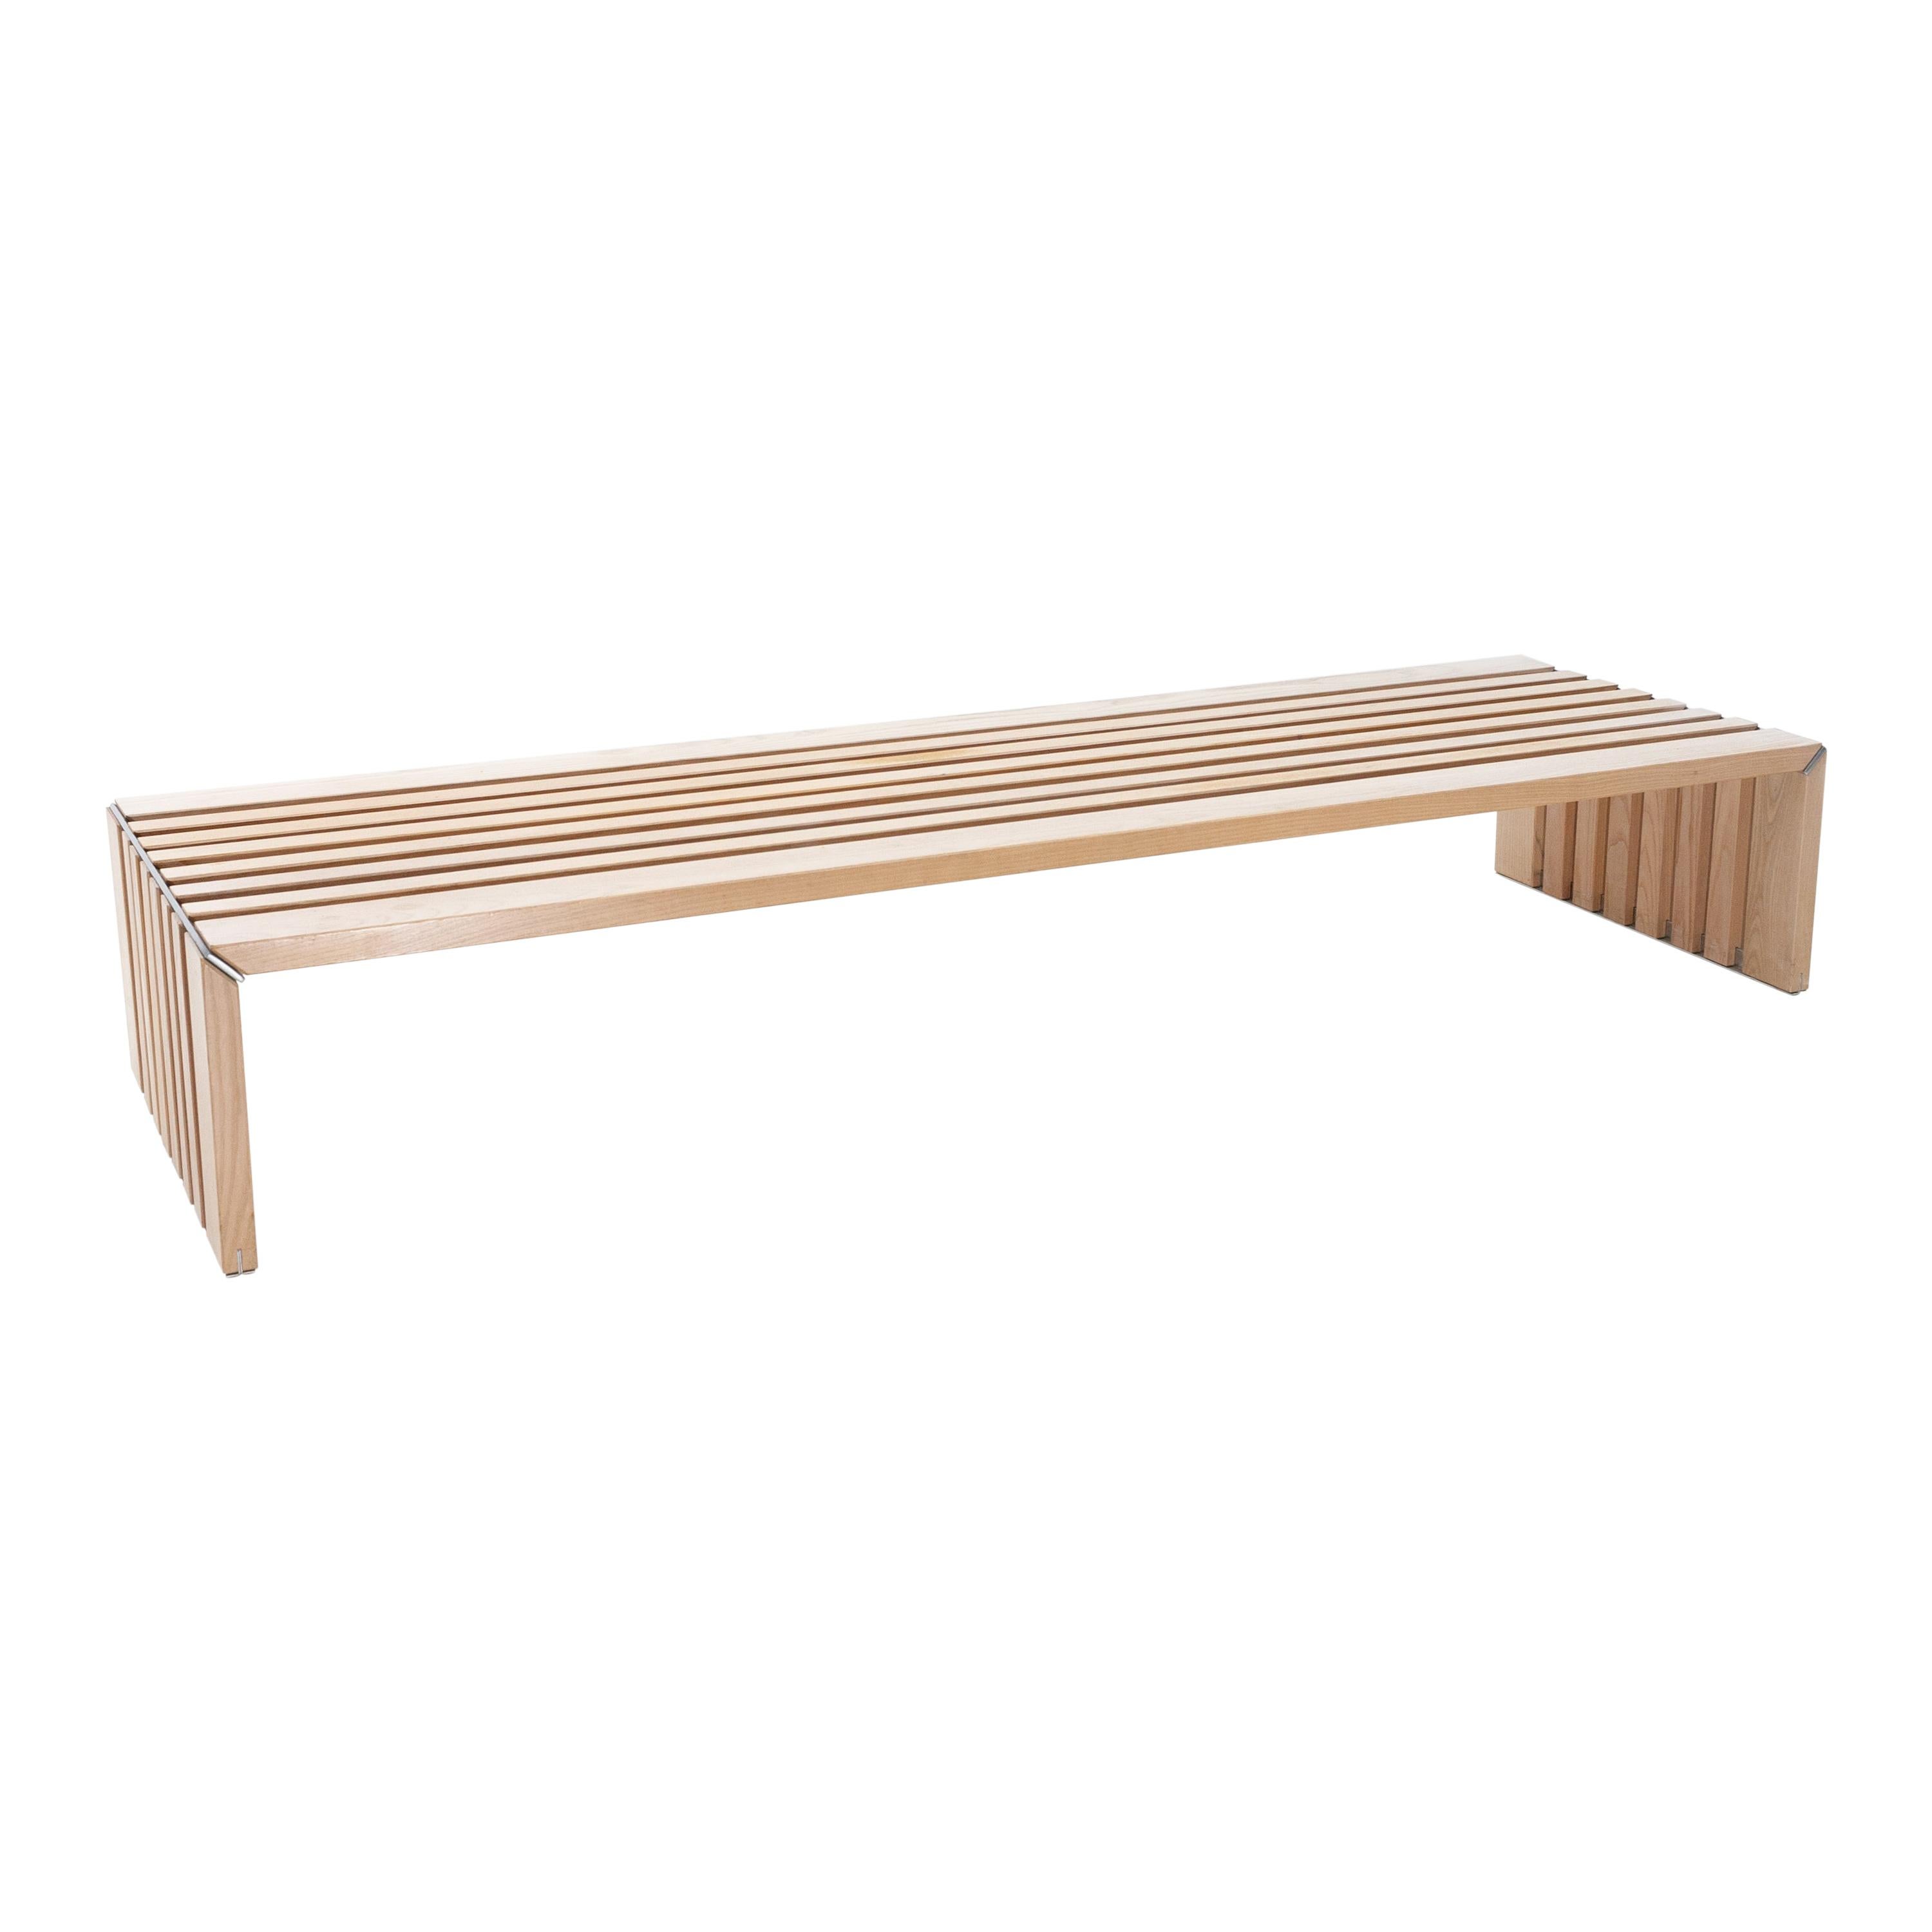 Walter Antonis Bench or Table